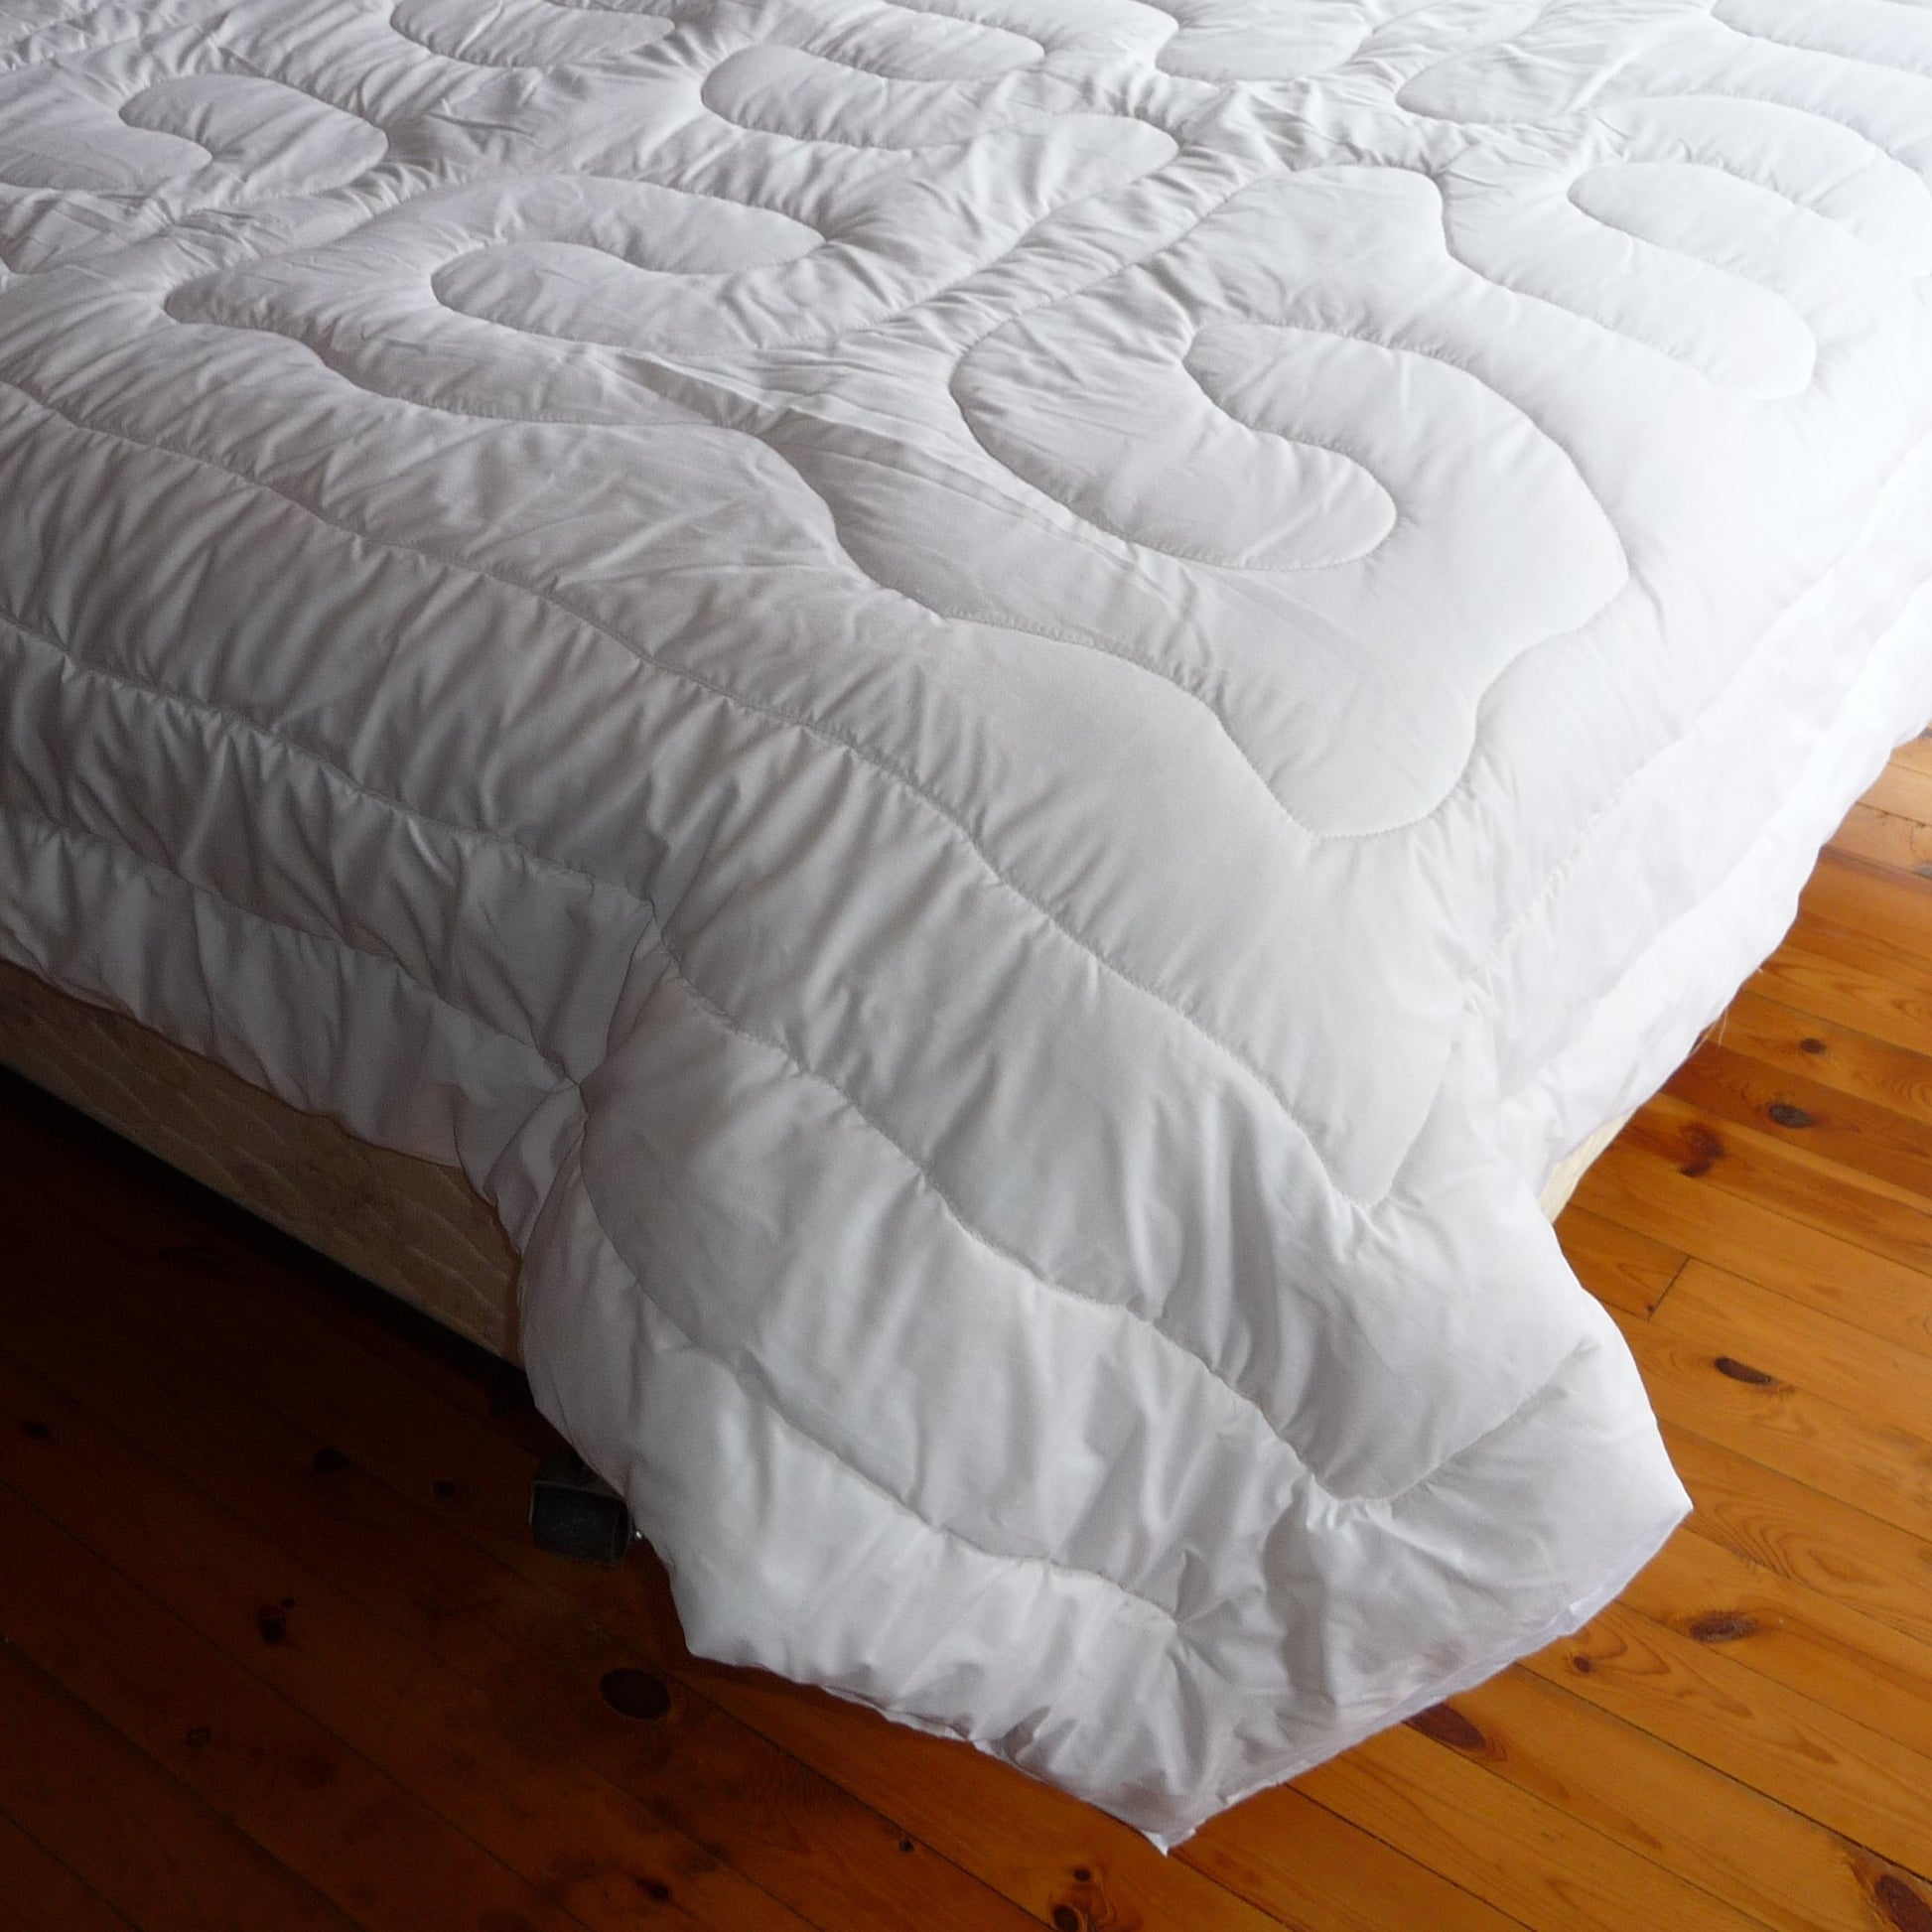 Cold Country Wool Comforter. Made in Canada 